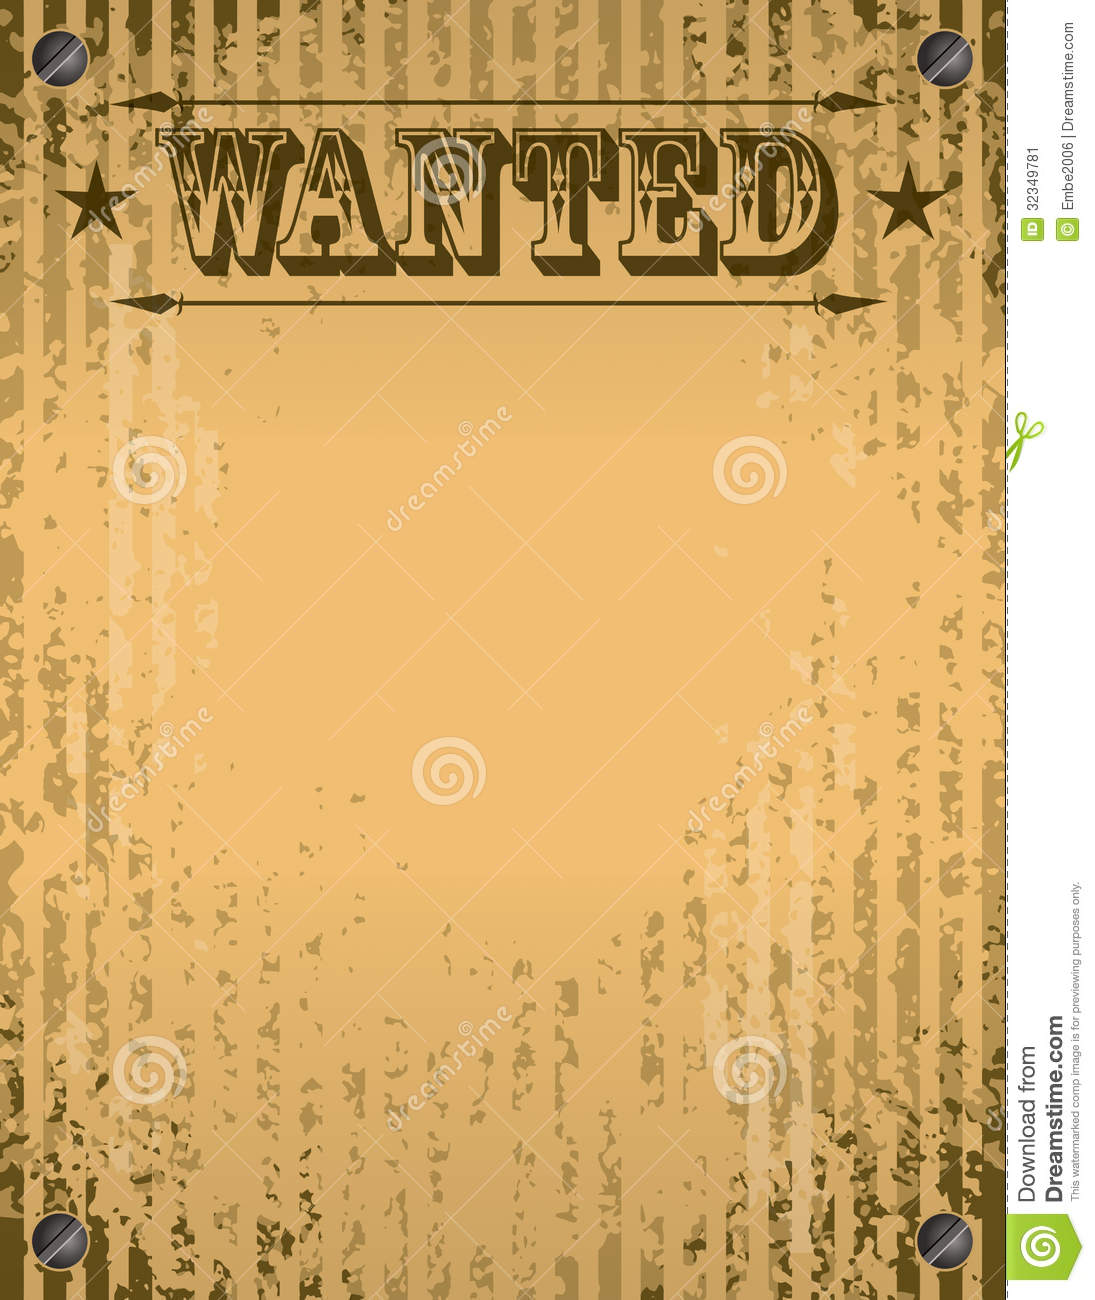 Wanted Poster Stock Image   Image  32349781